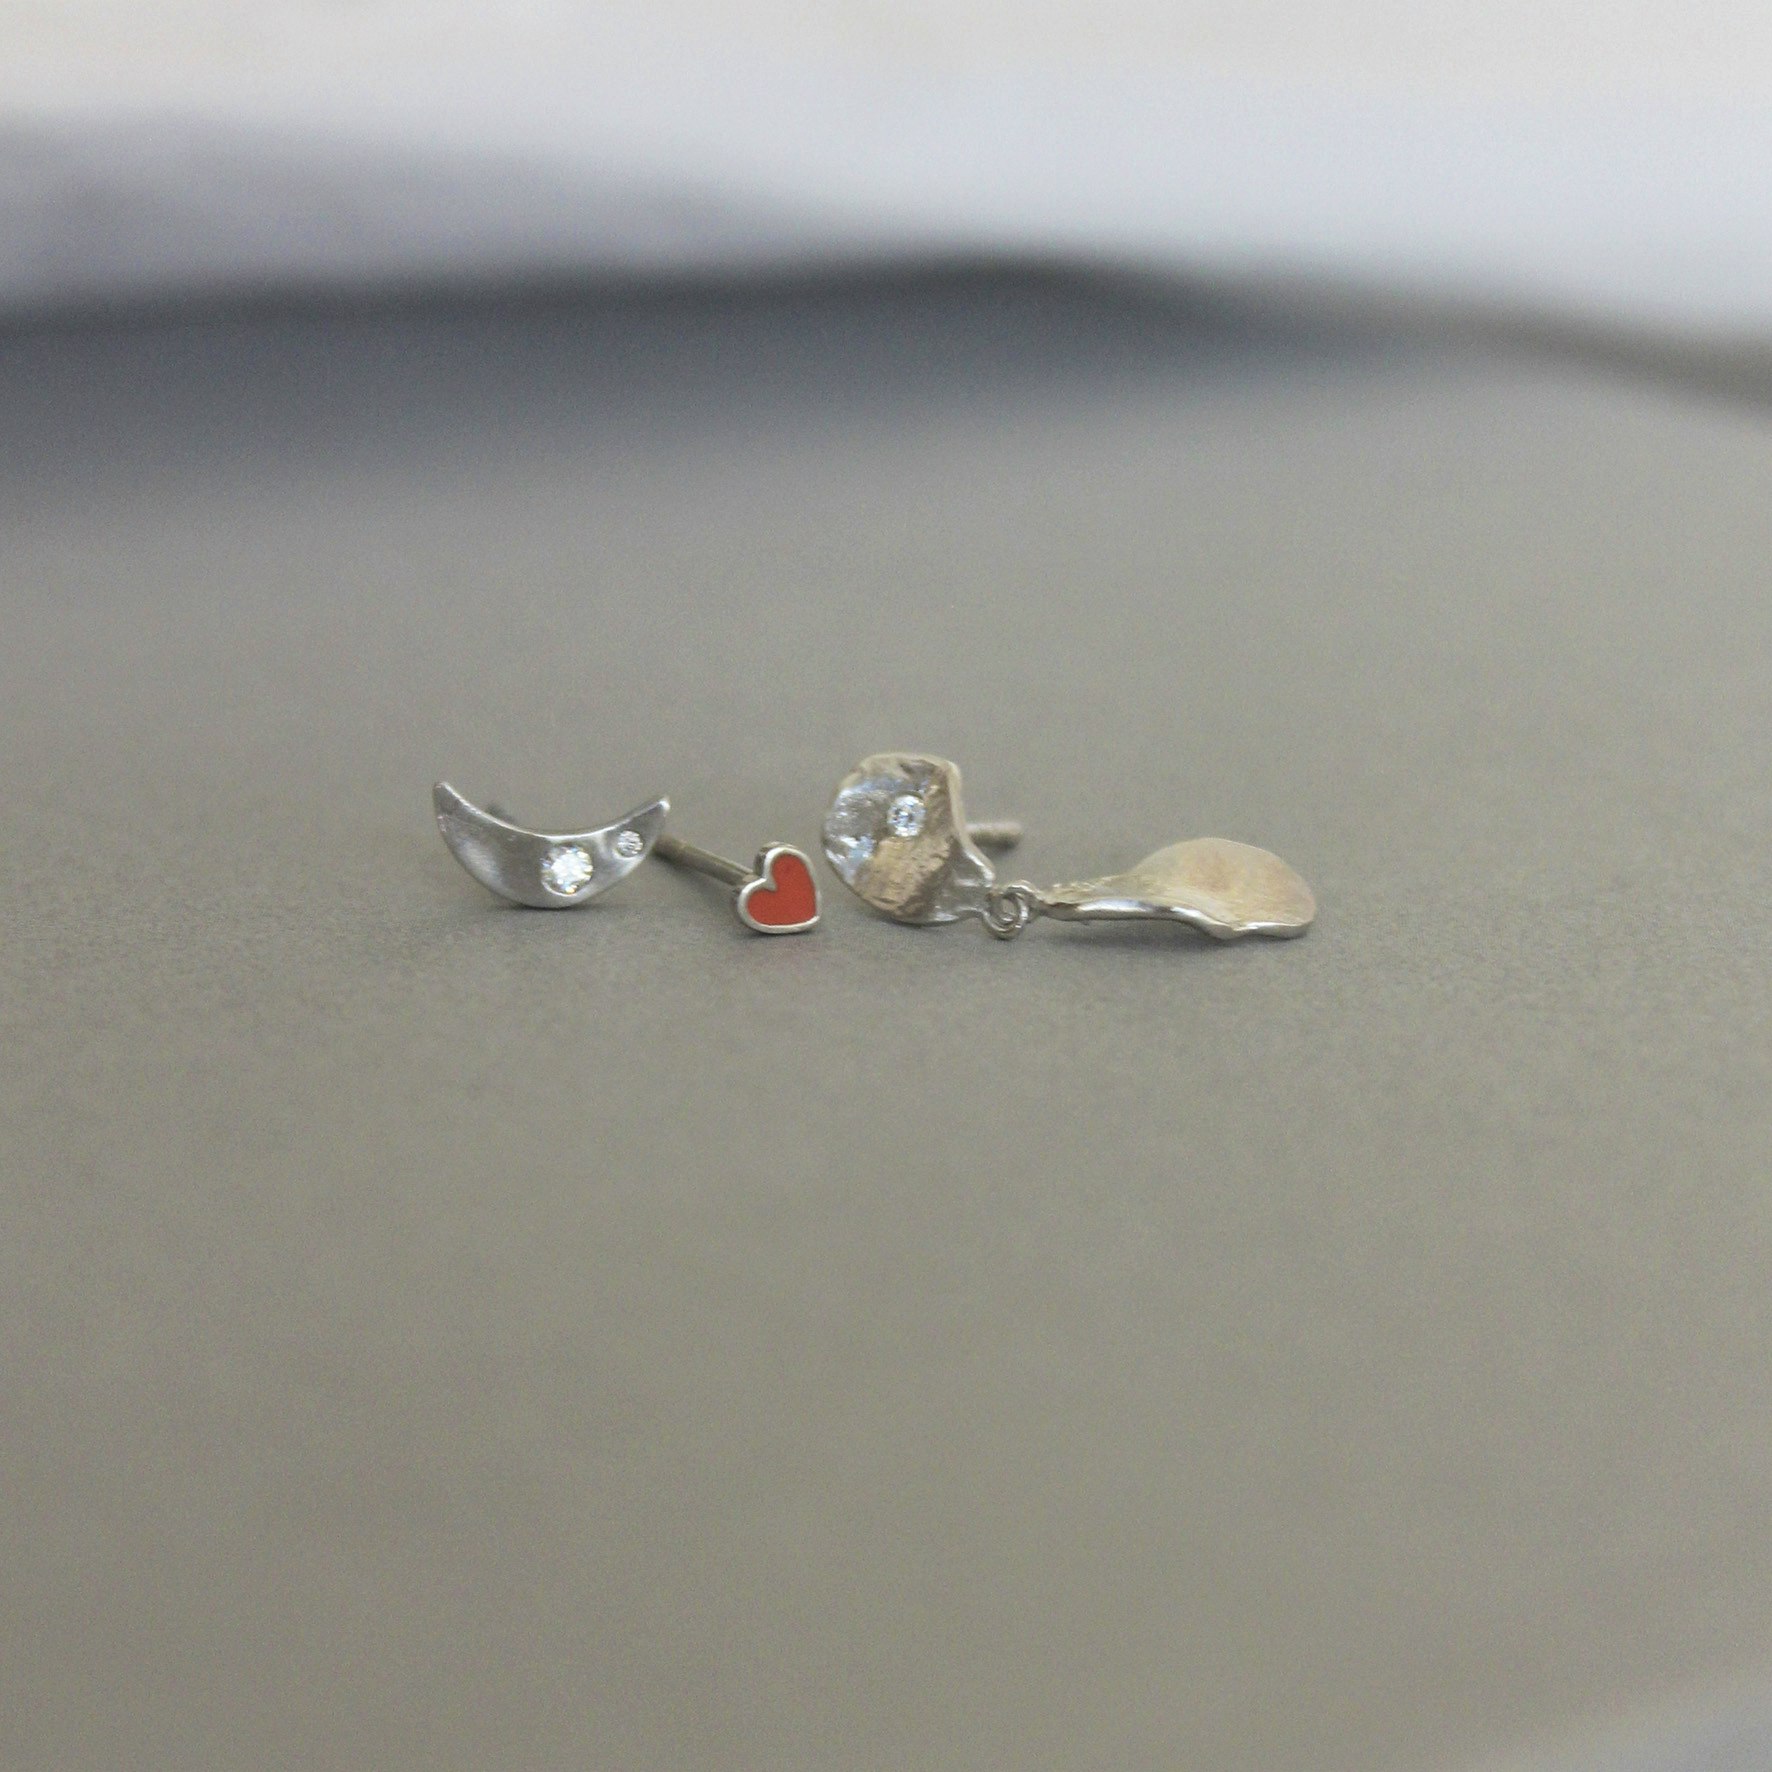 Clear Sea Earring With Stone fra STINE A Jewelry i Forgyldt-Sølv Sterling 925